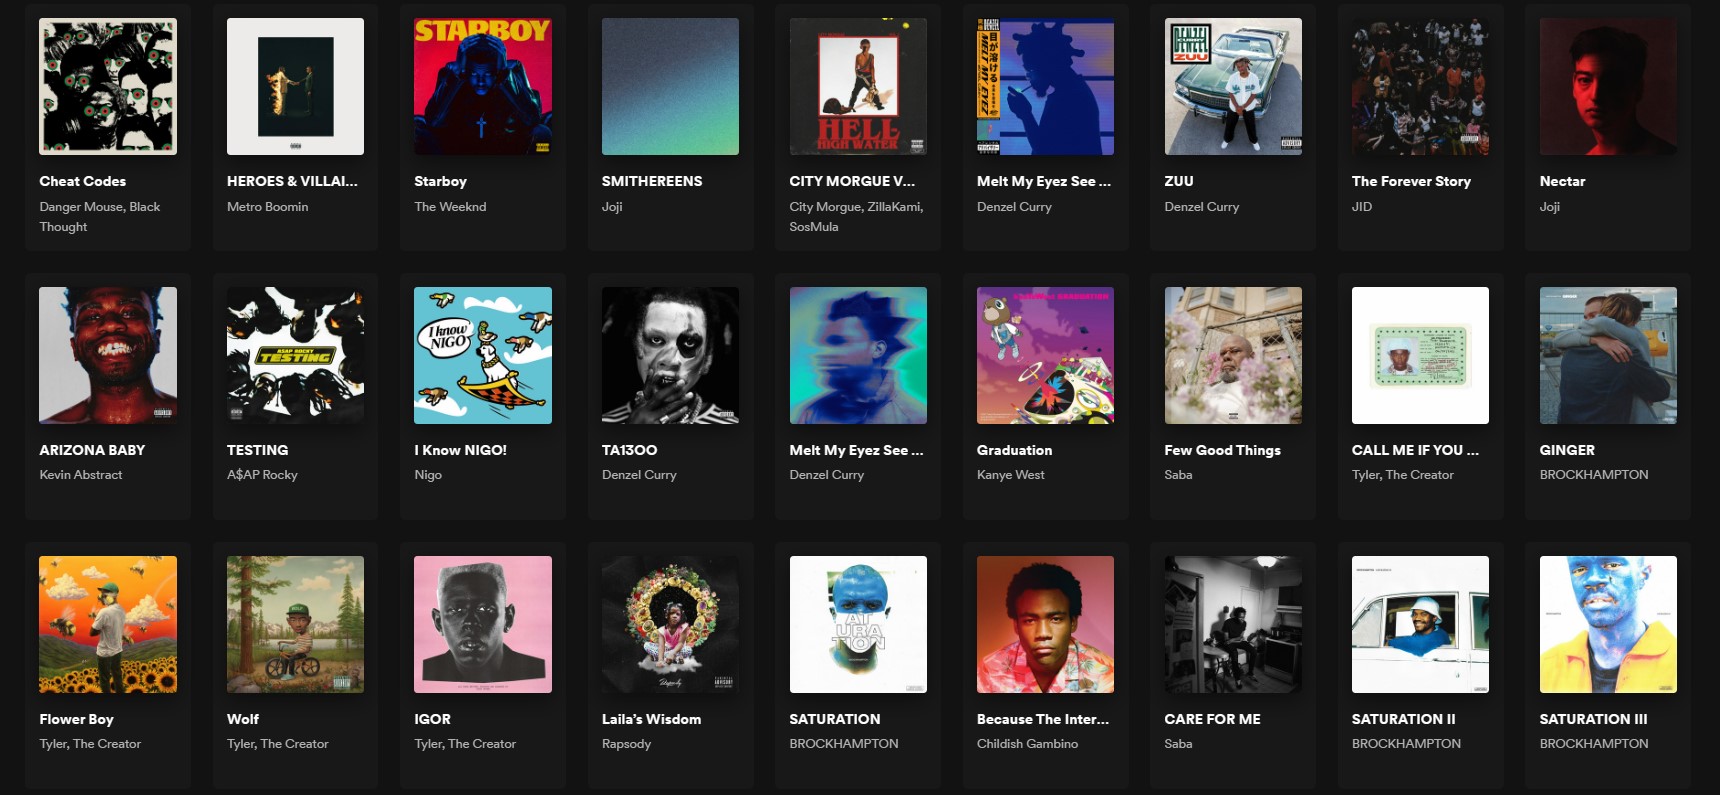 A screenshot of a spotify home page with many album covers such as Cheat Codes, Starboy, SMITHEREENS, Graduation, Flower Boy, CARE FOR ME, and more, all laid out in a grid.